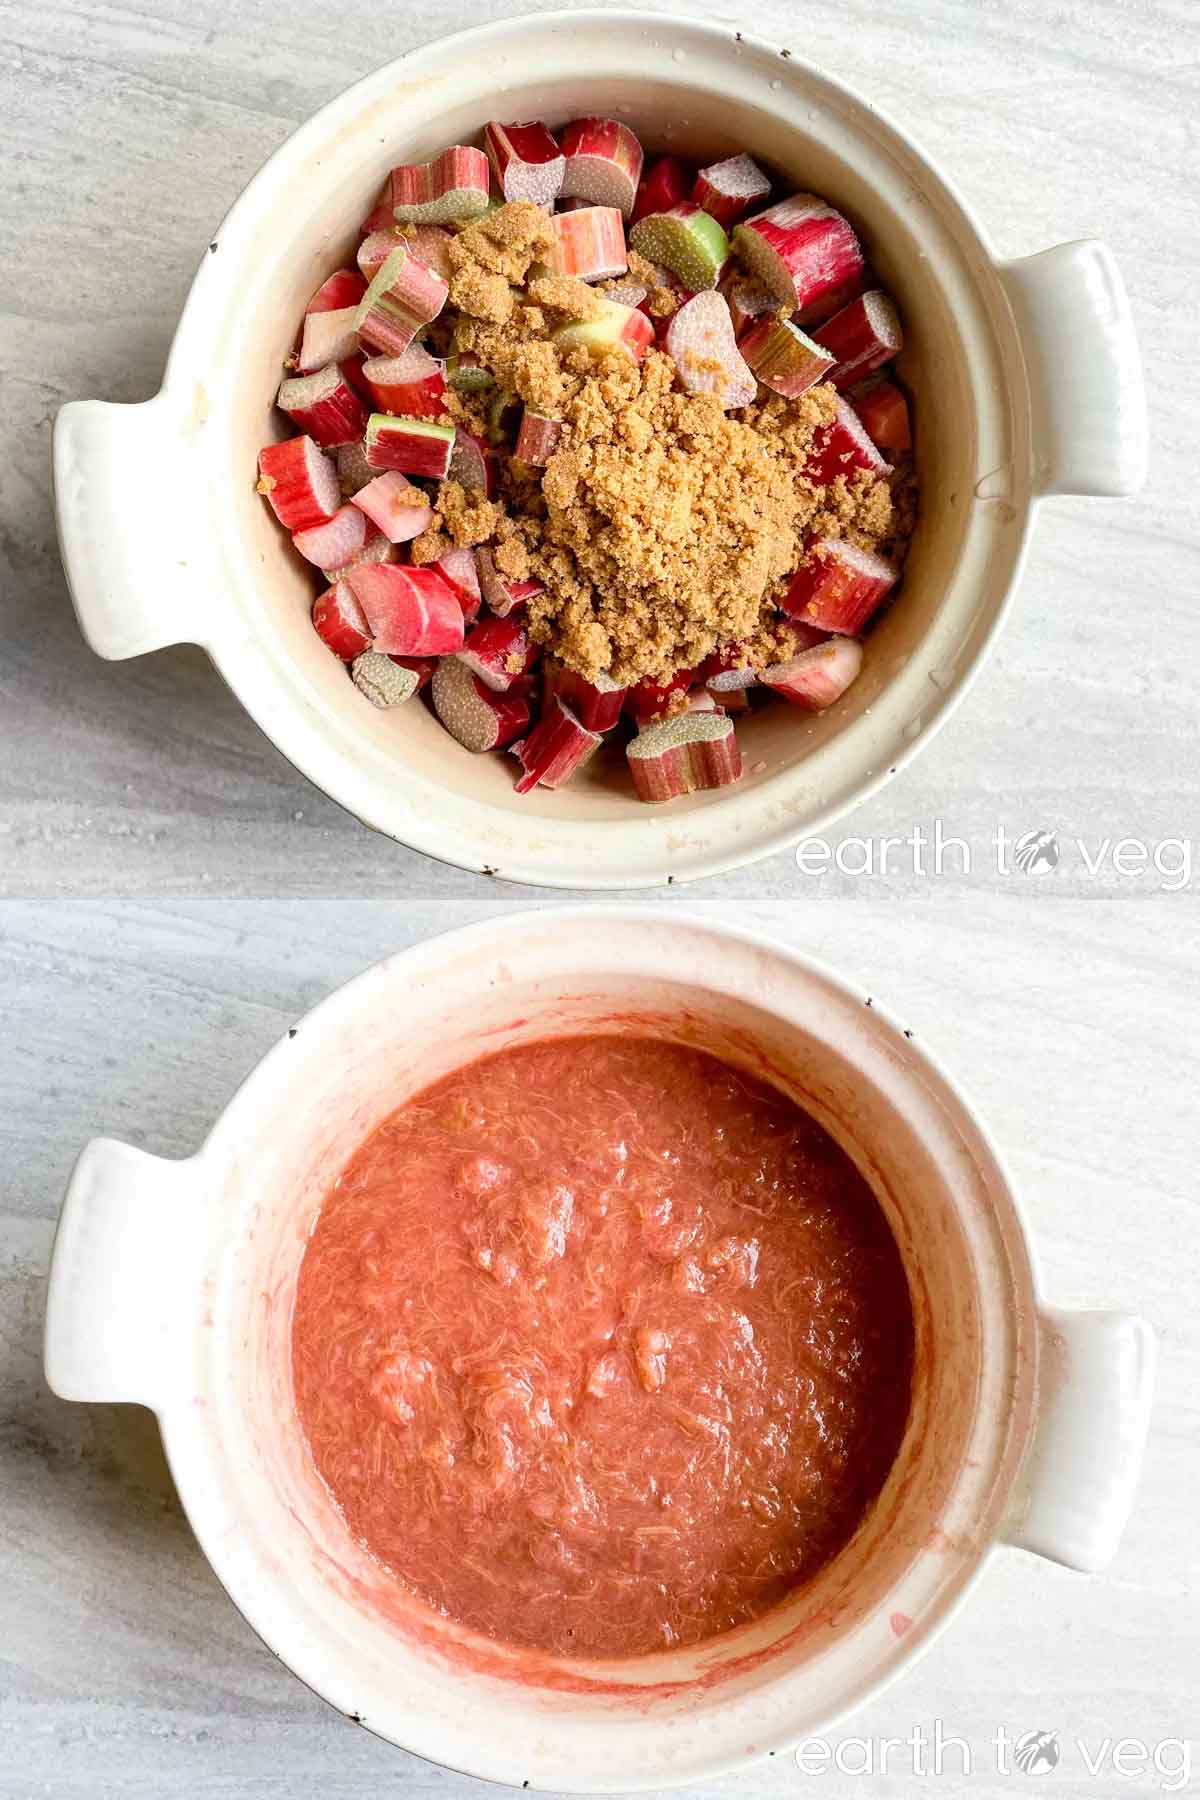 Before and after rhubarb butter in a crockpot. Top image of ingredients in a slow cooker crock and bottom image of the rhubarb butter in the crock.